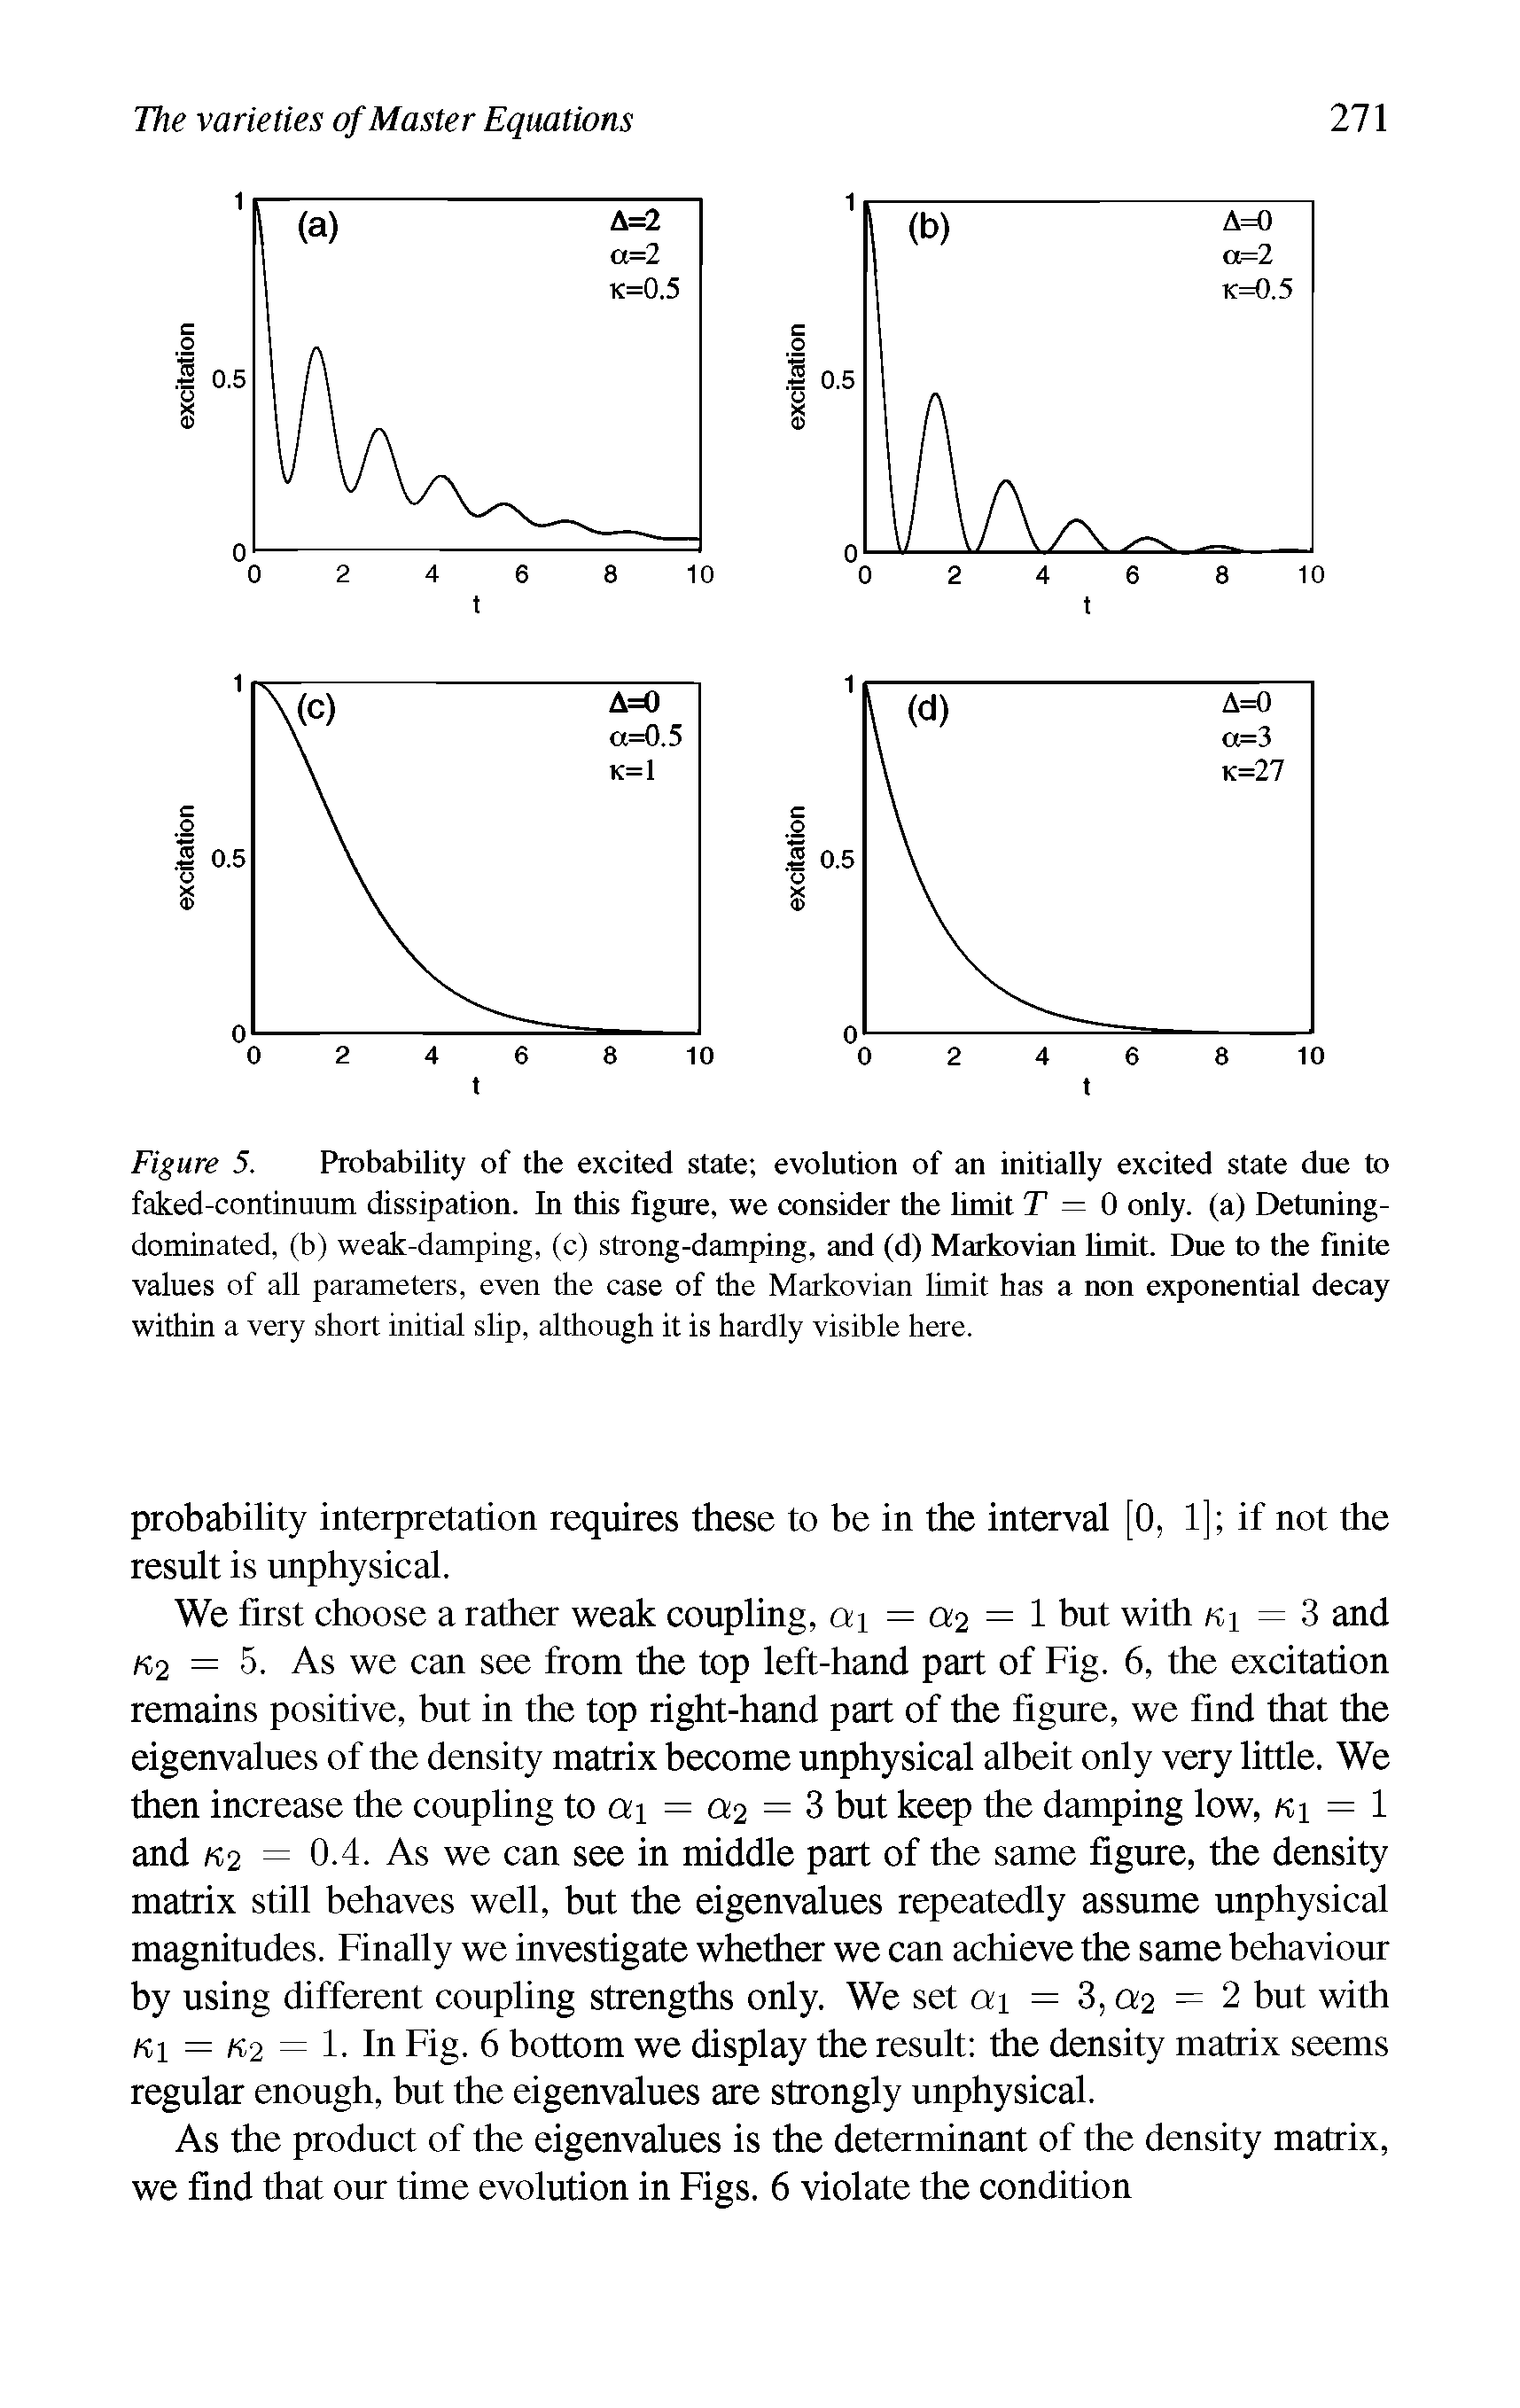 Figure 5. Probability of the excited state evolution of an initially excited state due to faked-continuum dissipation. In this figure, we consider the limit T = 0 only, (a) Detuning-dominated, (b) weak-damping, (c) strong-damping, and (d) Markovian limit. Due to the finite values of all parameters, even the case of the Markovian limit has a non exponential decay within a very short initial slip, although it is hardly visible here.